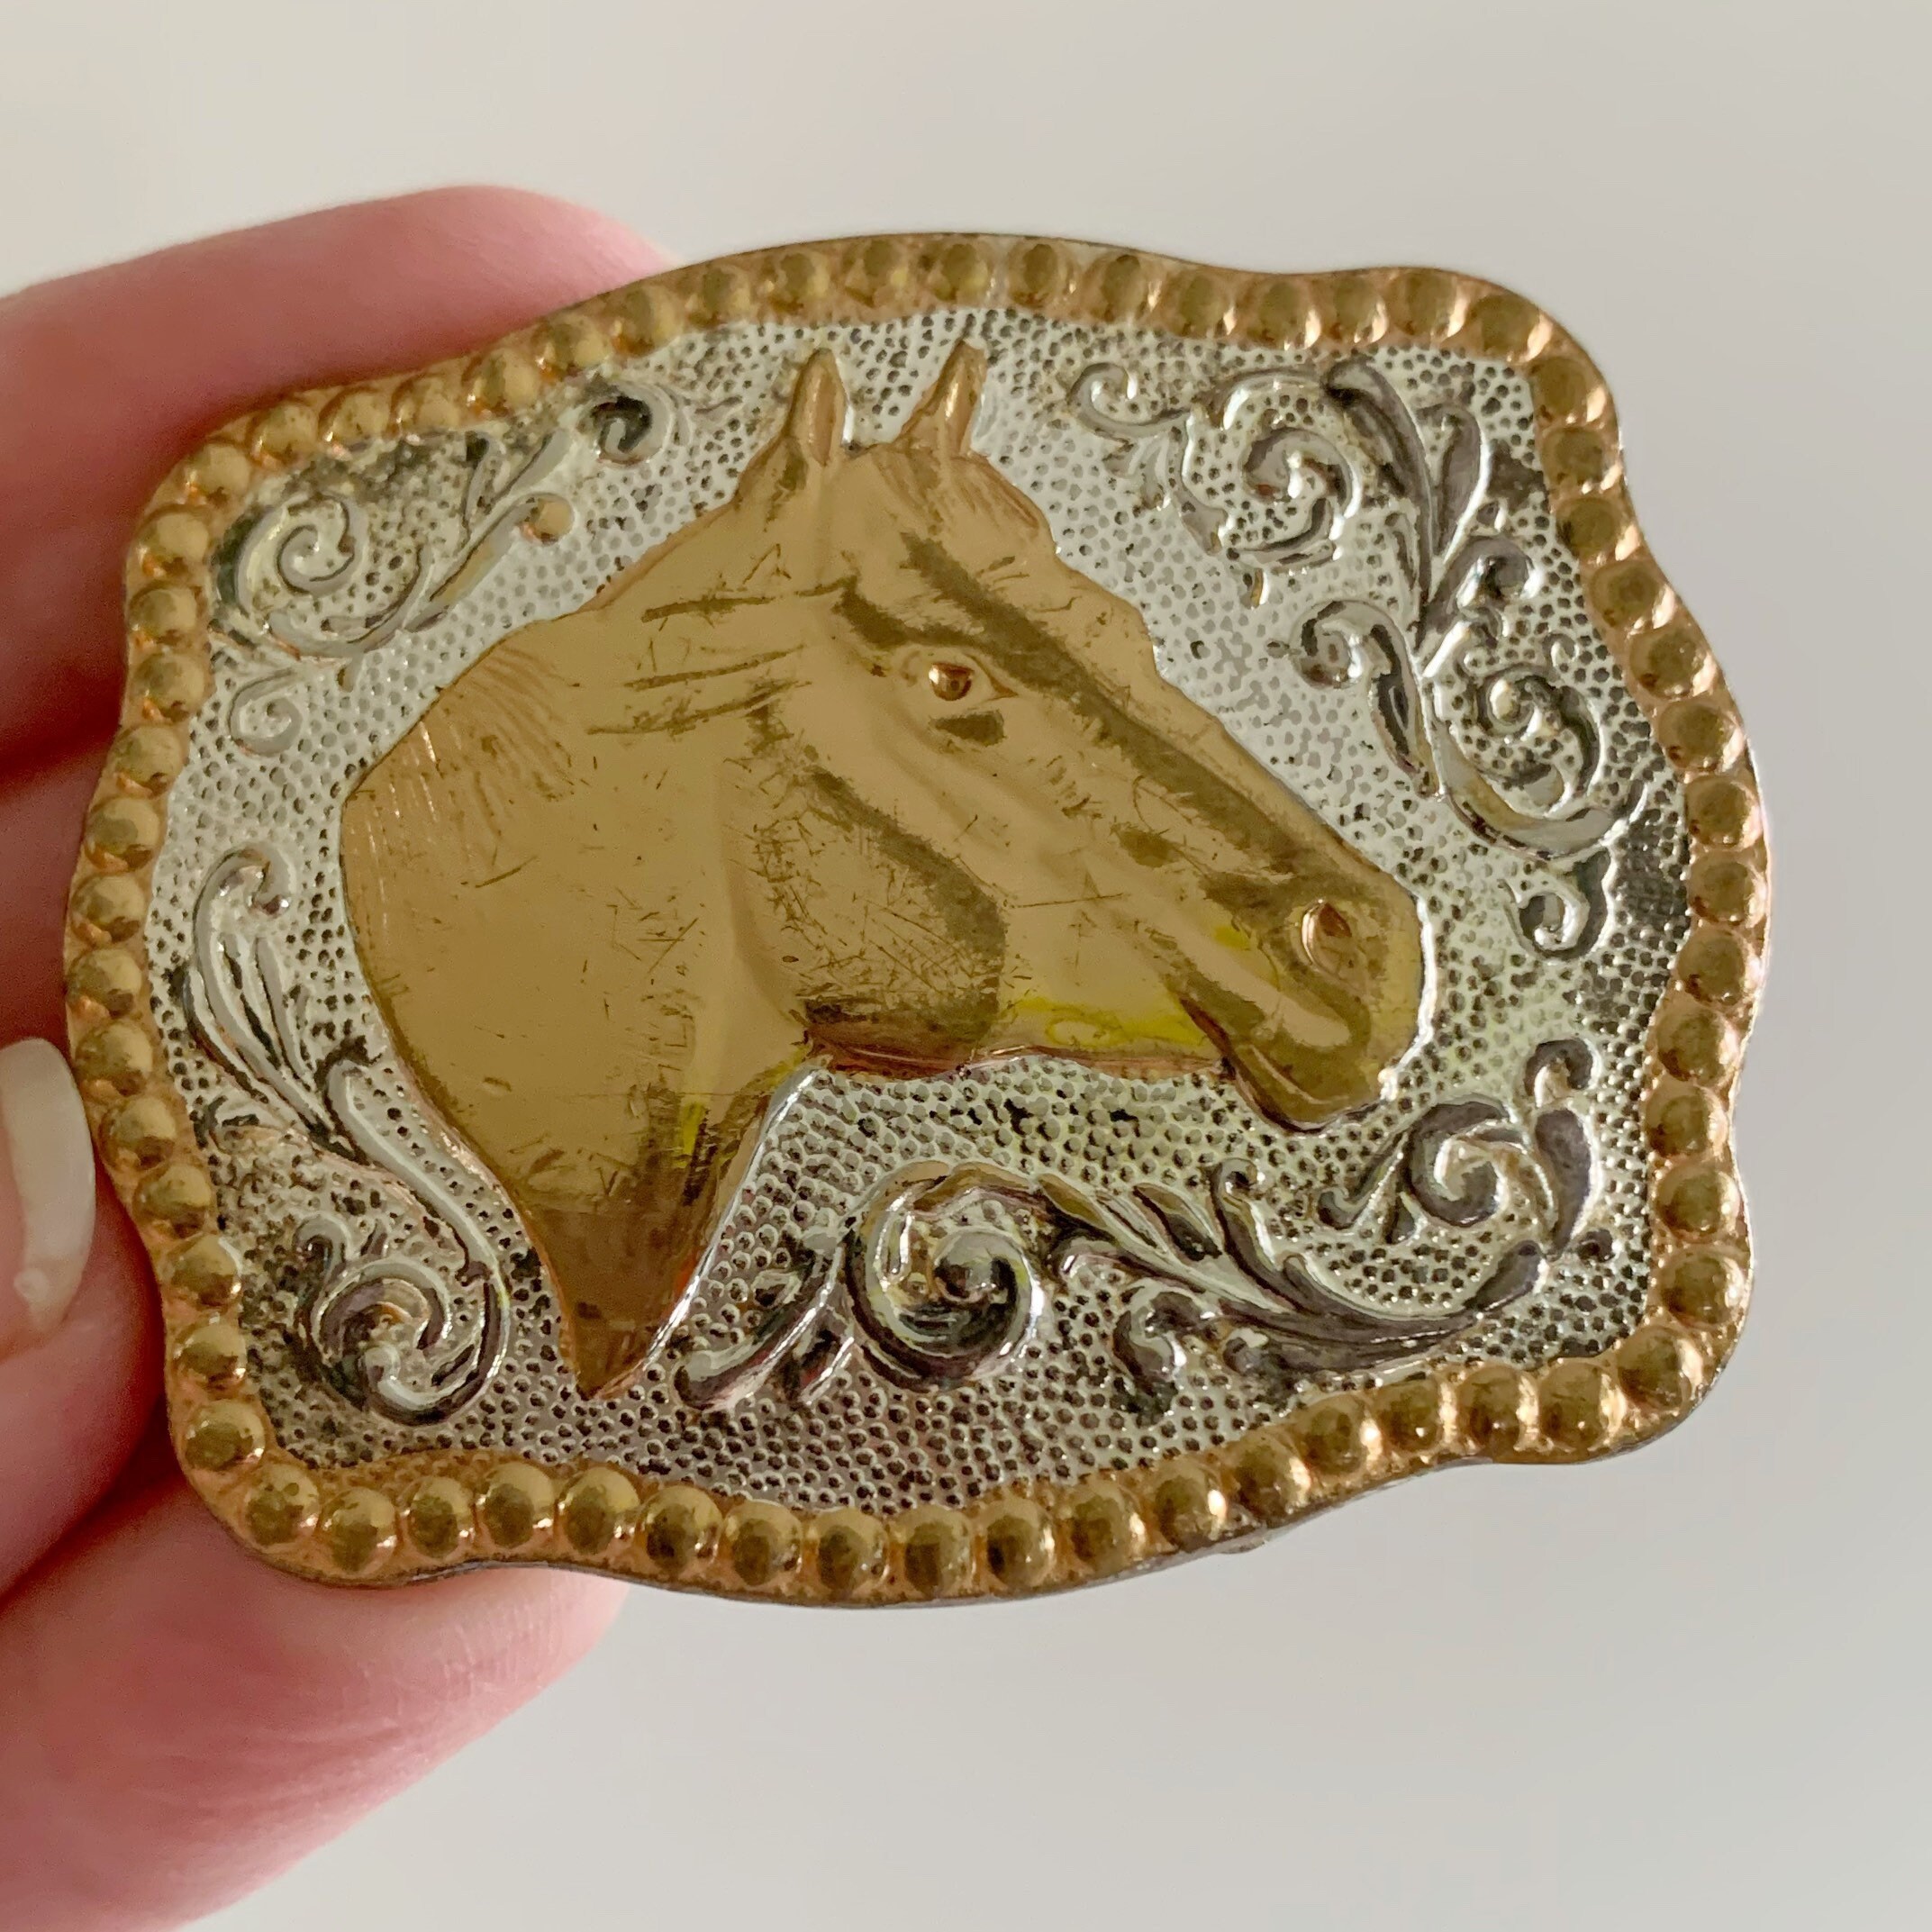 Sunrise Outlet German Silver Tone Belt Buckle with Gold Tone Horsehead Detail